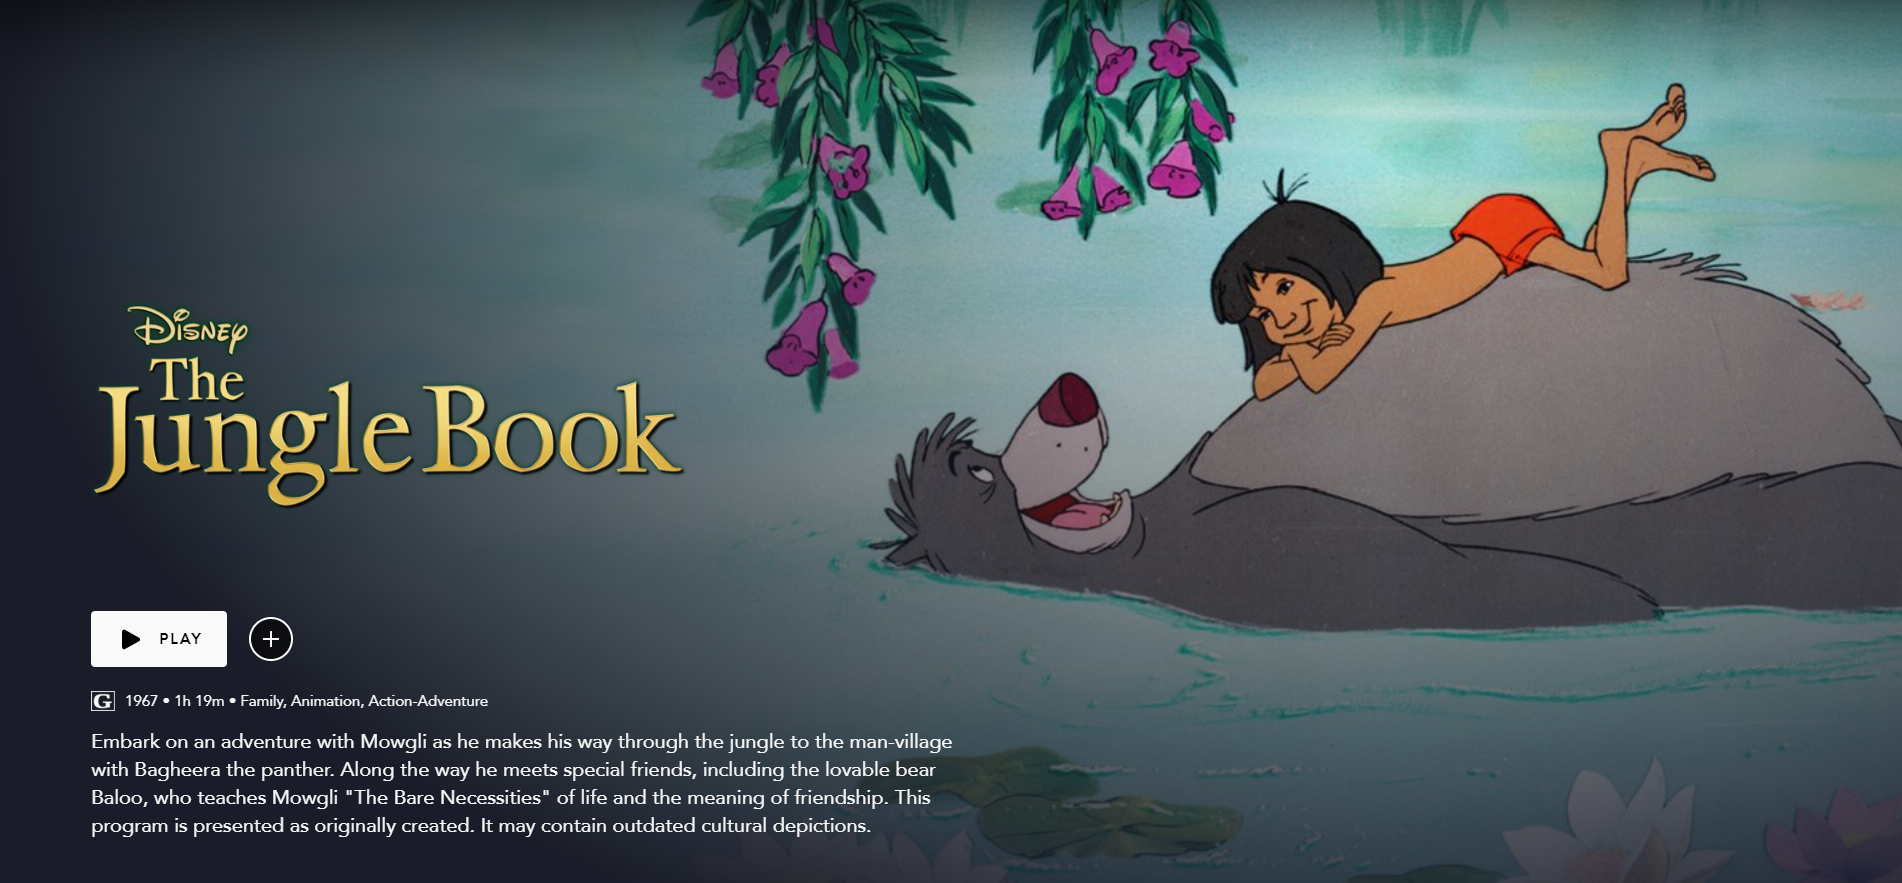 panthers name in jungle book movie